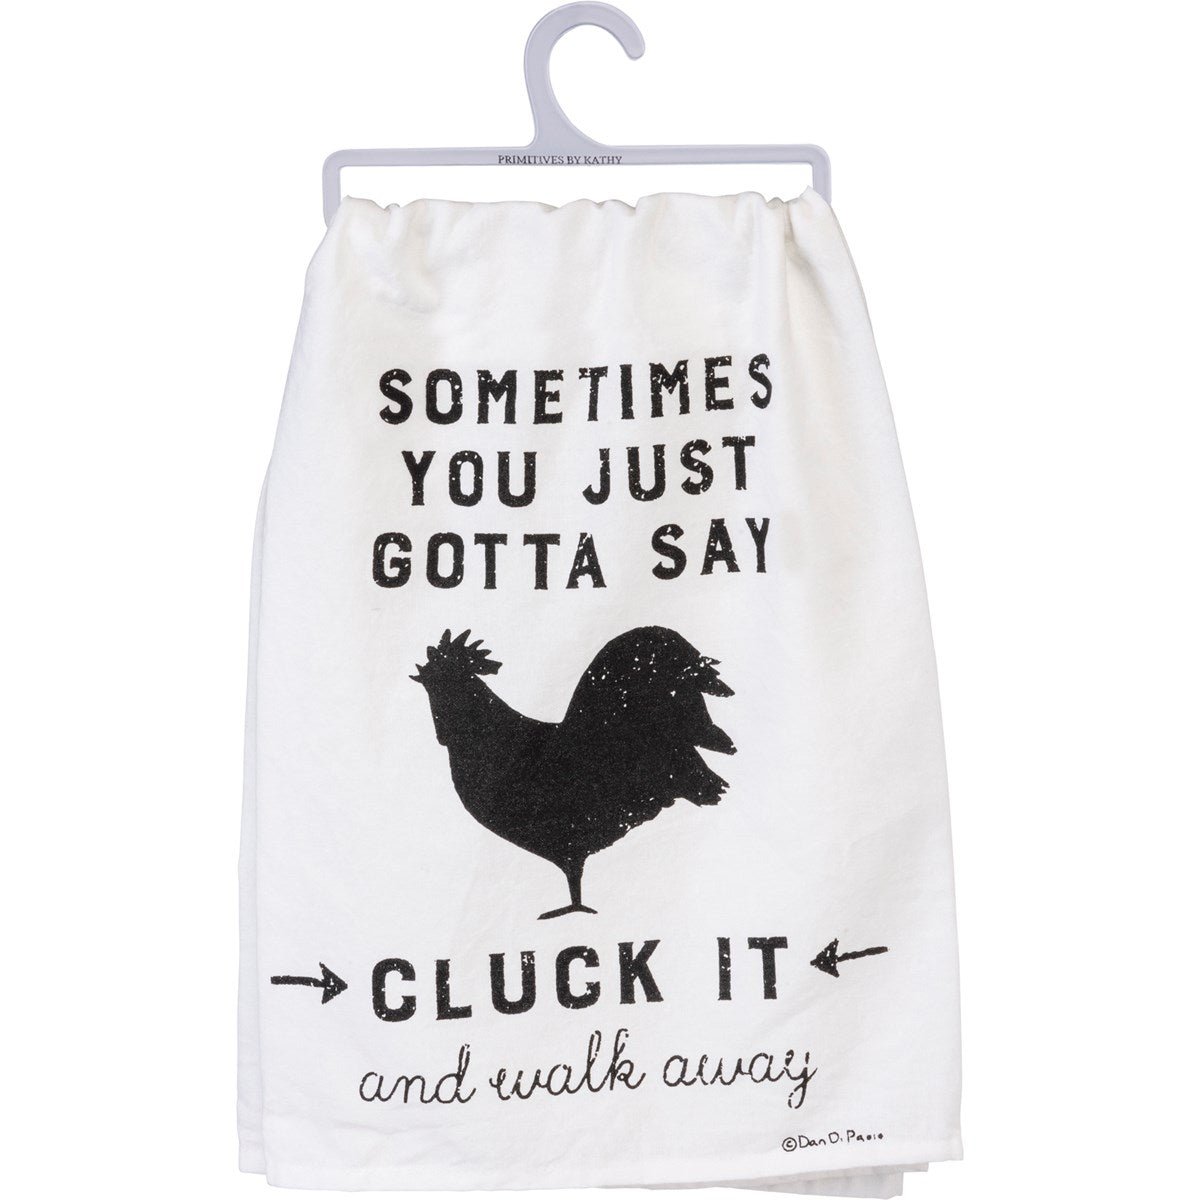 "SOMETIMES YOU JUST GOTTA SAY CLUCK IT " DISH TOWEL